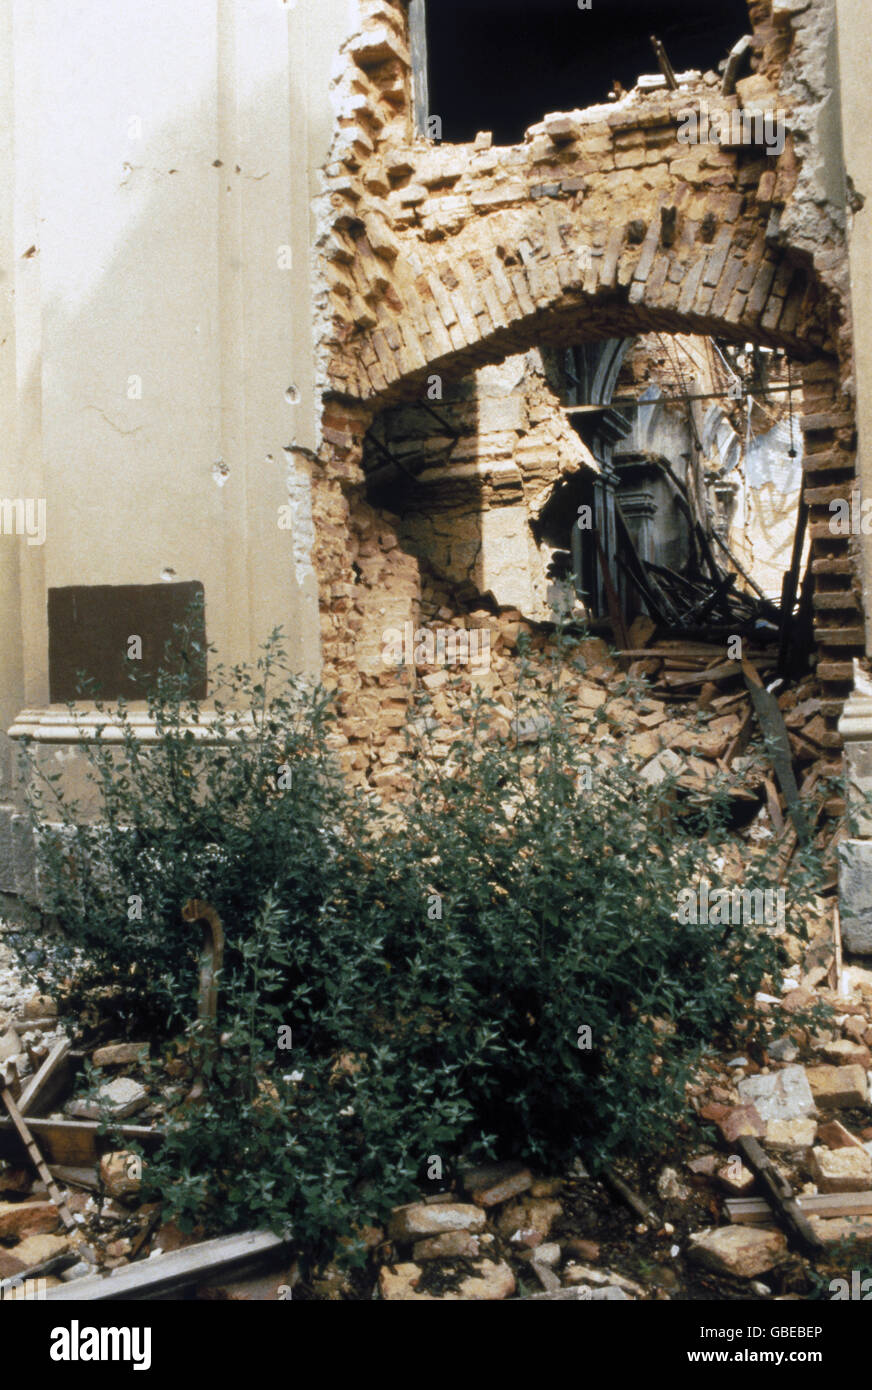 events, Croatian War of Independence 1991 - 1995, destroyed church in Karlovac, Croatia, August 1992, Yugoslavia, Yugoslav Wars, Balkans, conflict, destruction, 1990s, 90s, 20th century, historic, historical,_NOT, Additional-Rights-Clearences-Not Available Stock Photo